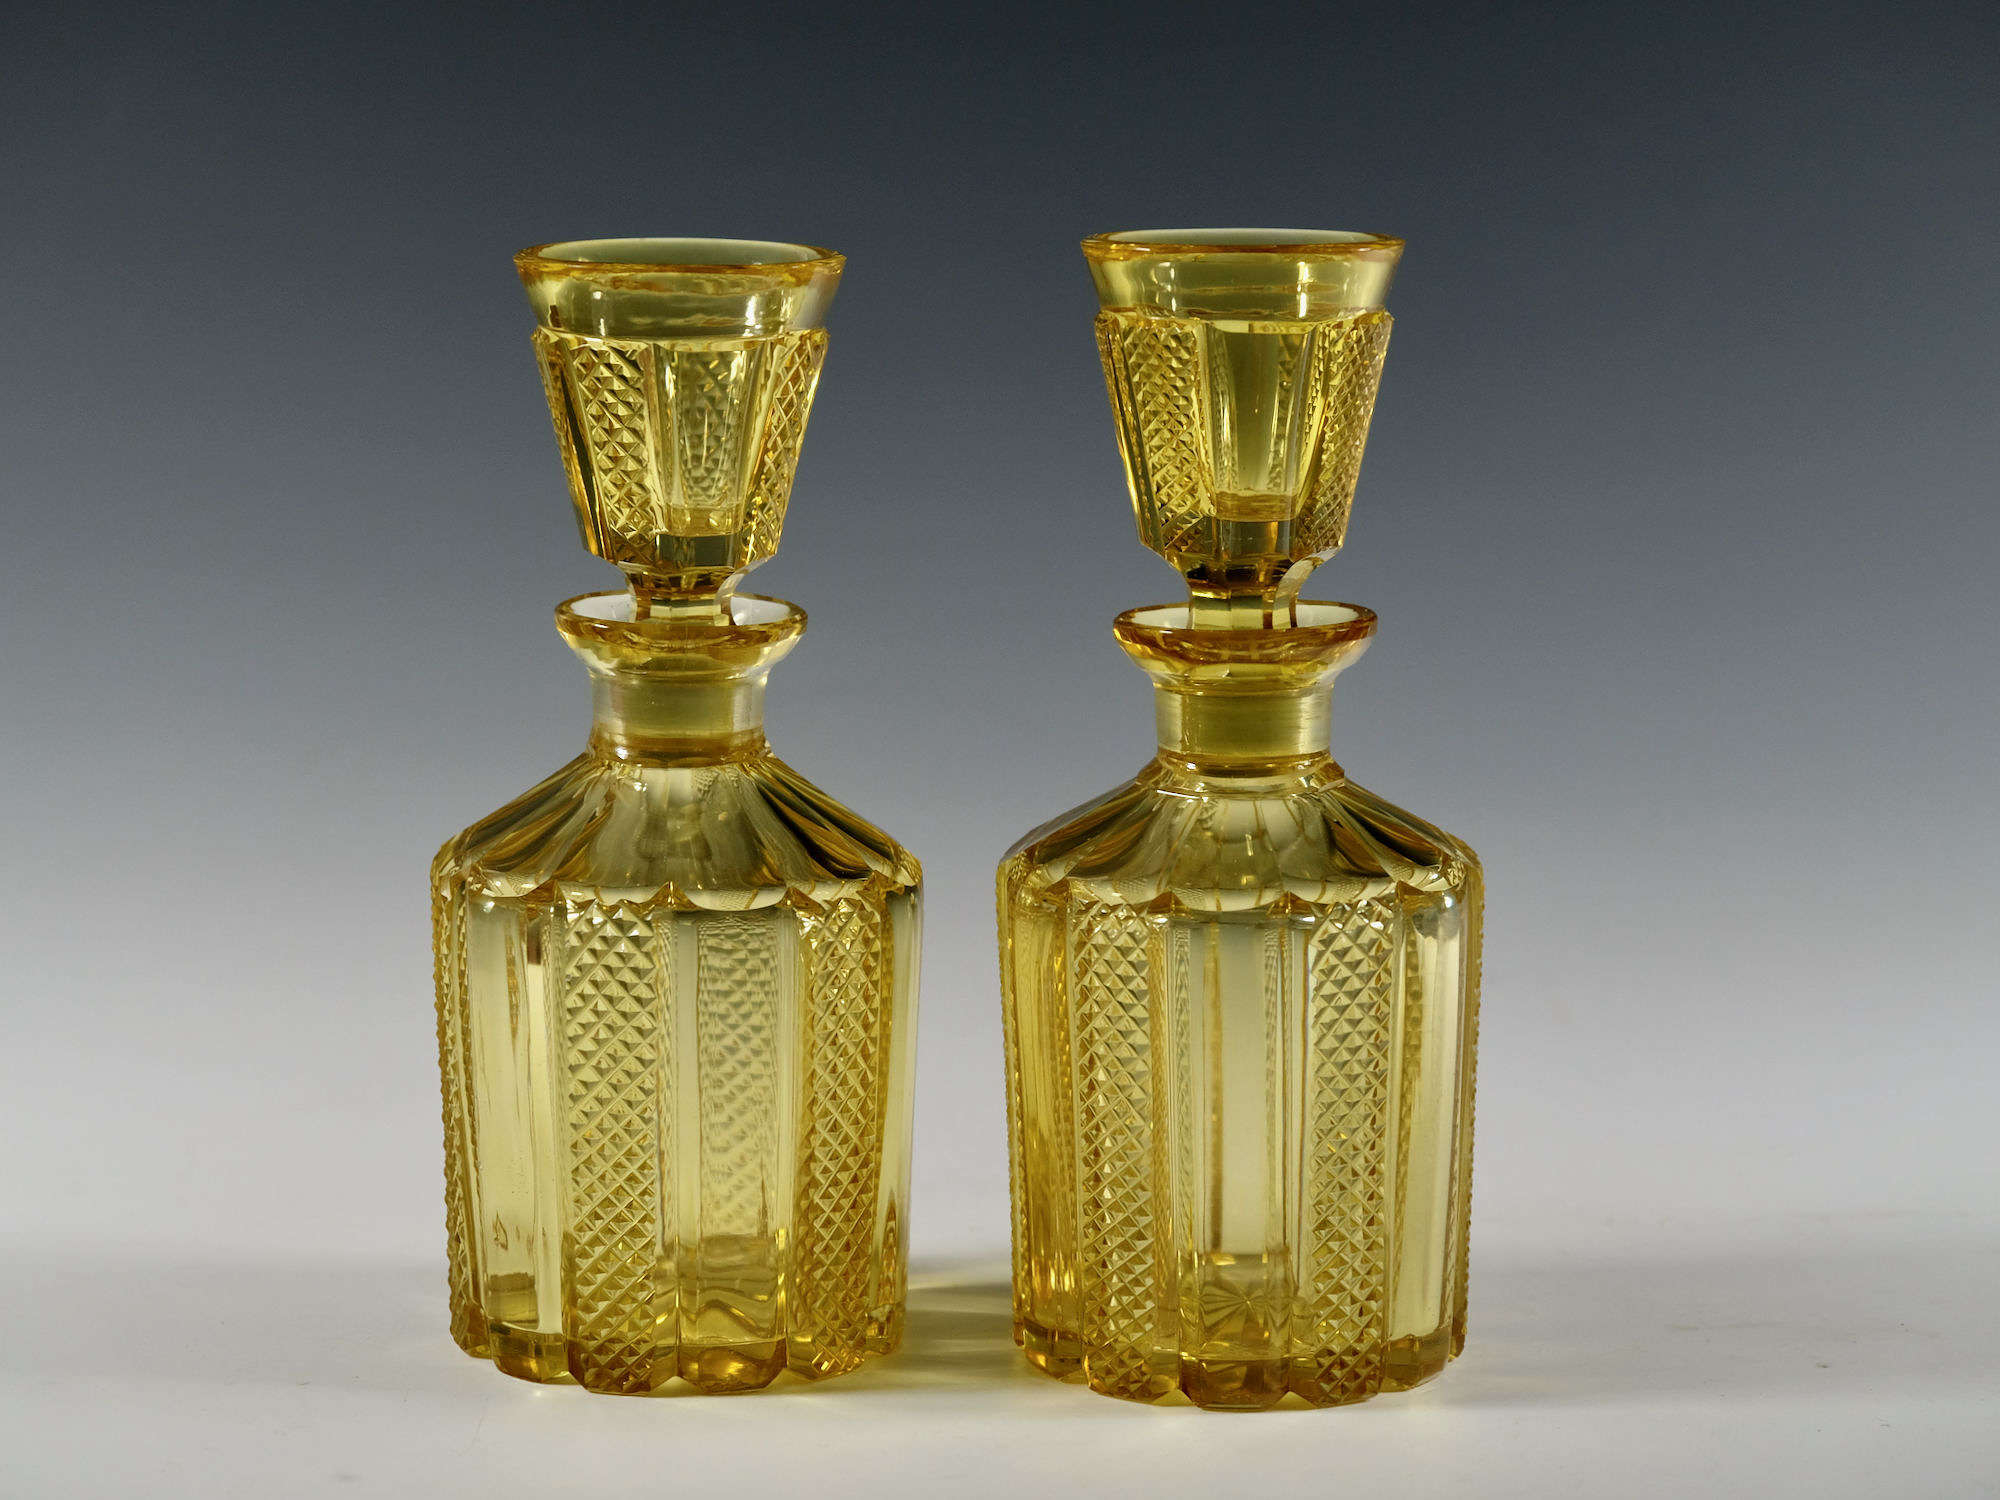 Antique glass - pair of decanters with tasting stoppers c1830